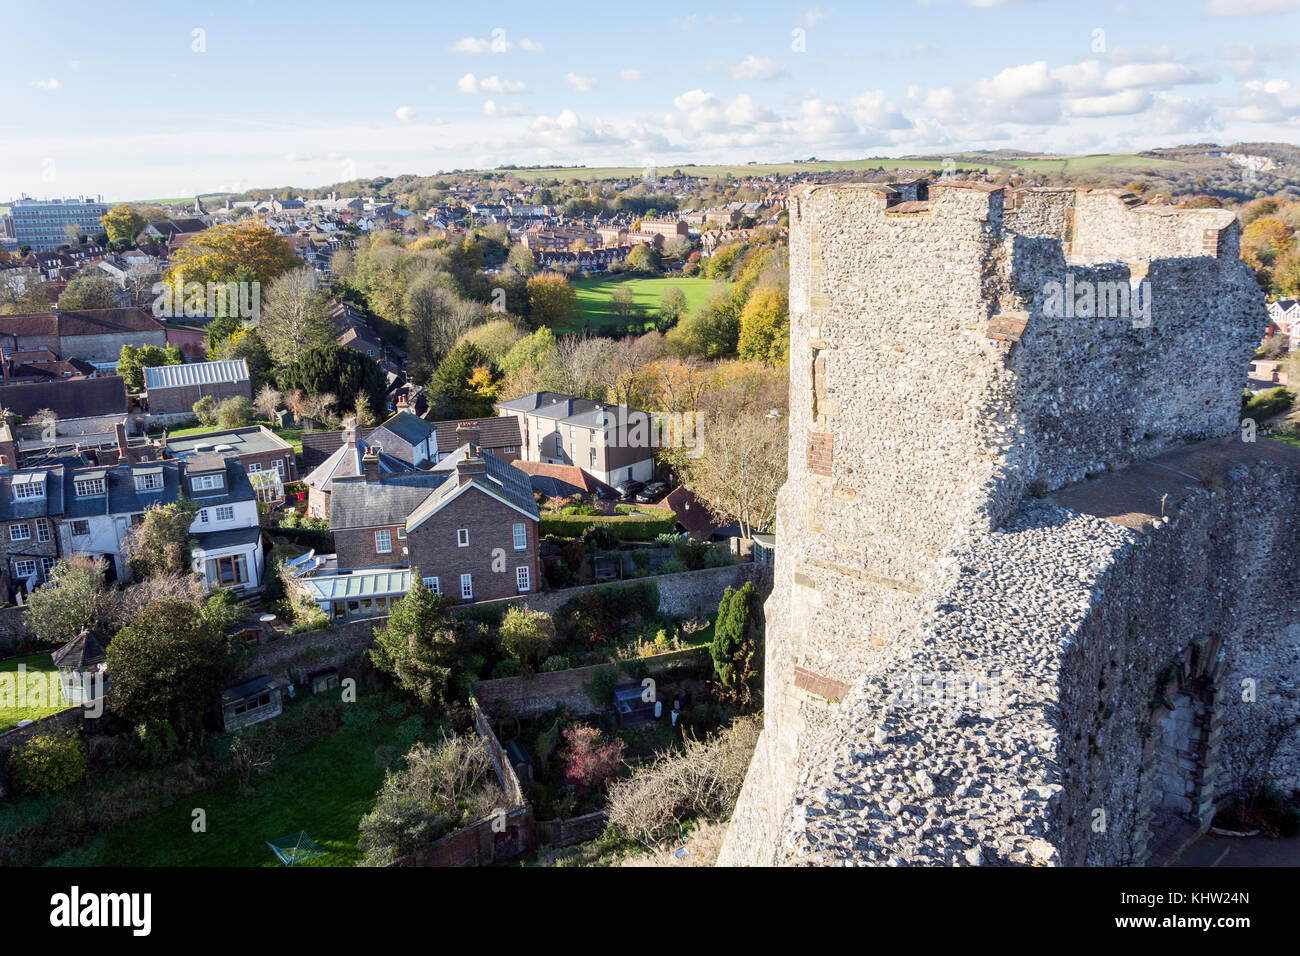 Aerial view of town from South Tower of Lewes Castle, High Street, Lewes, East Sussex, England, United Kingdom Stock Photo